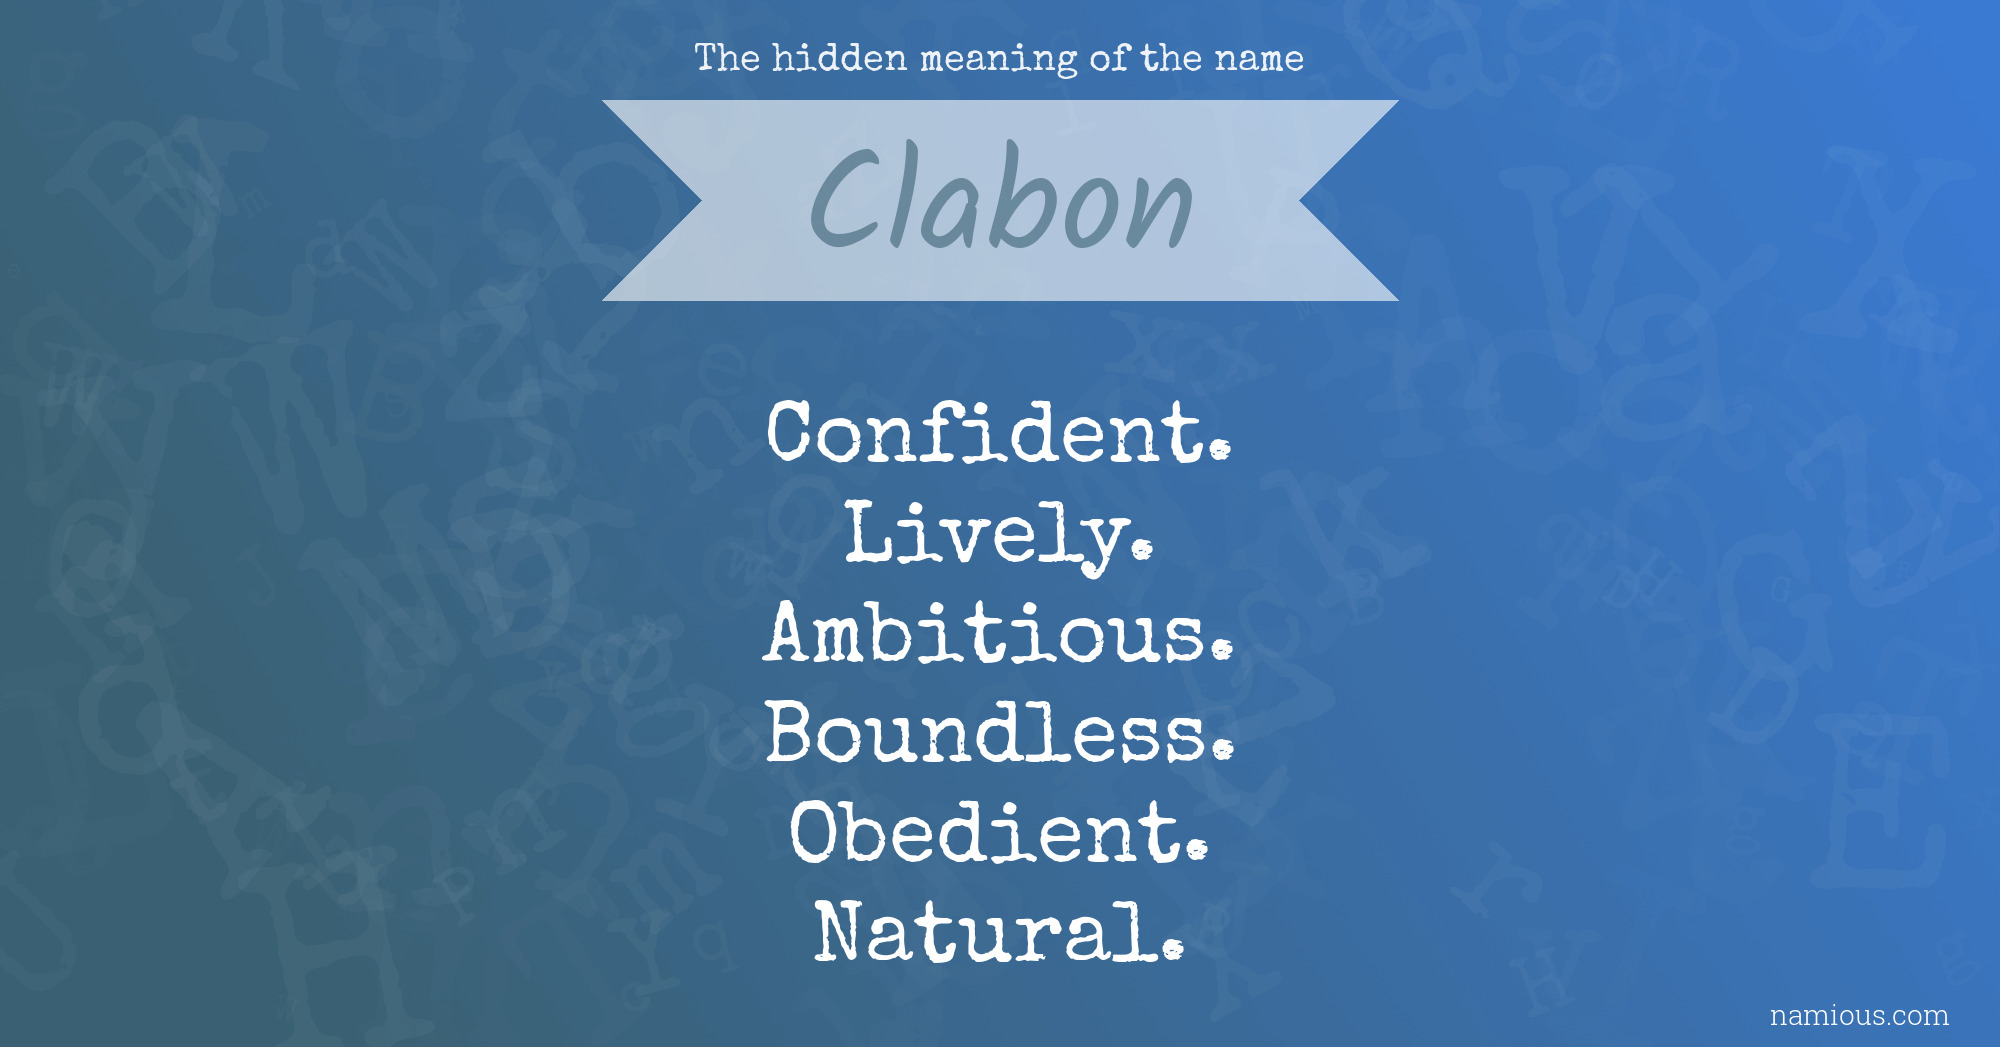 The hidden meaning of the name Clabon